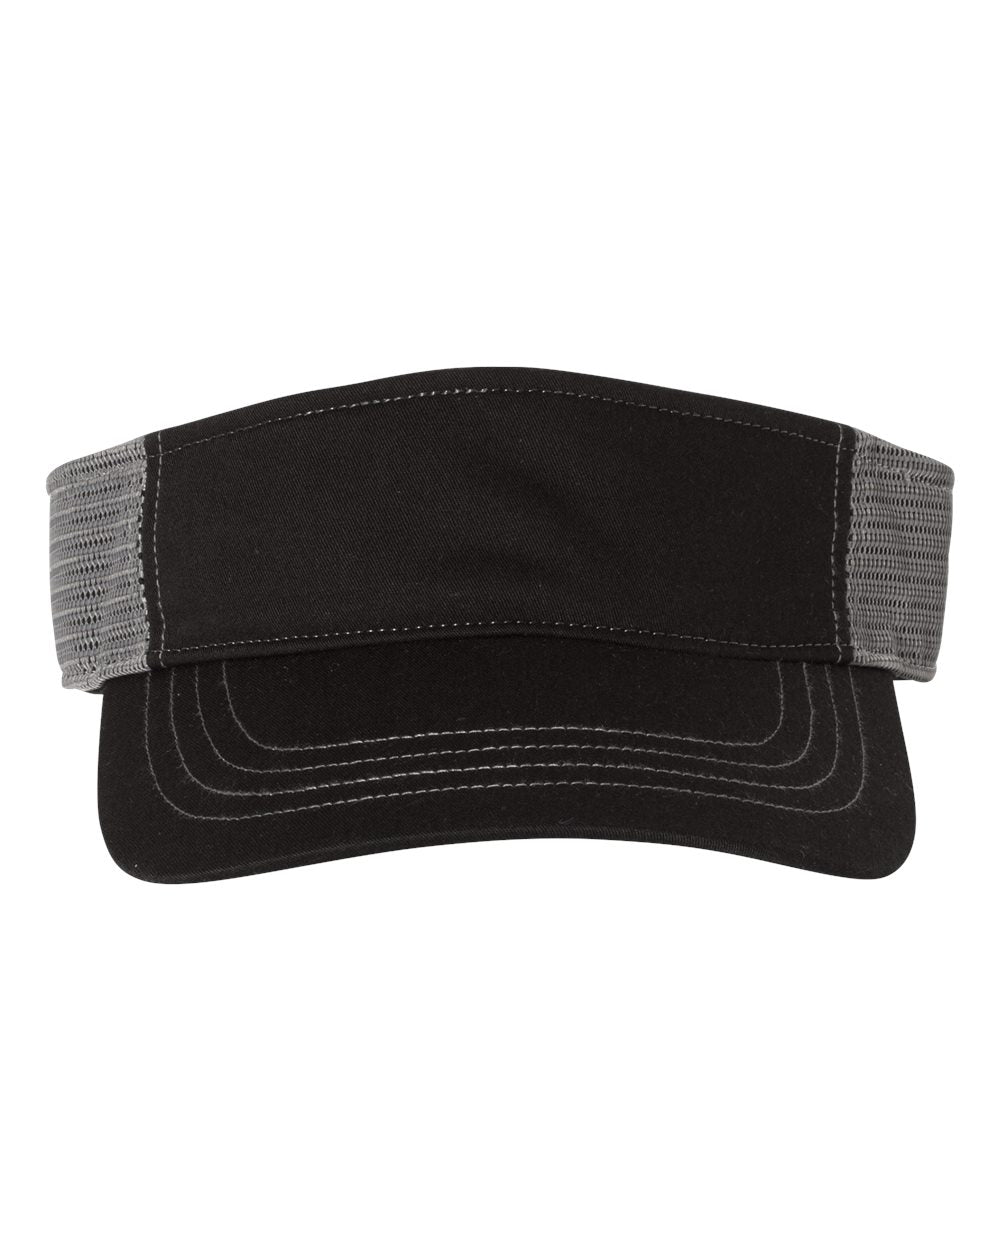 A Richardson trucker visor with a black front panel and charcoal mesh back.